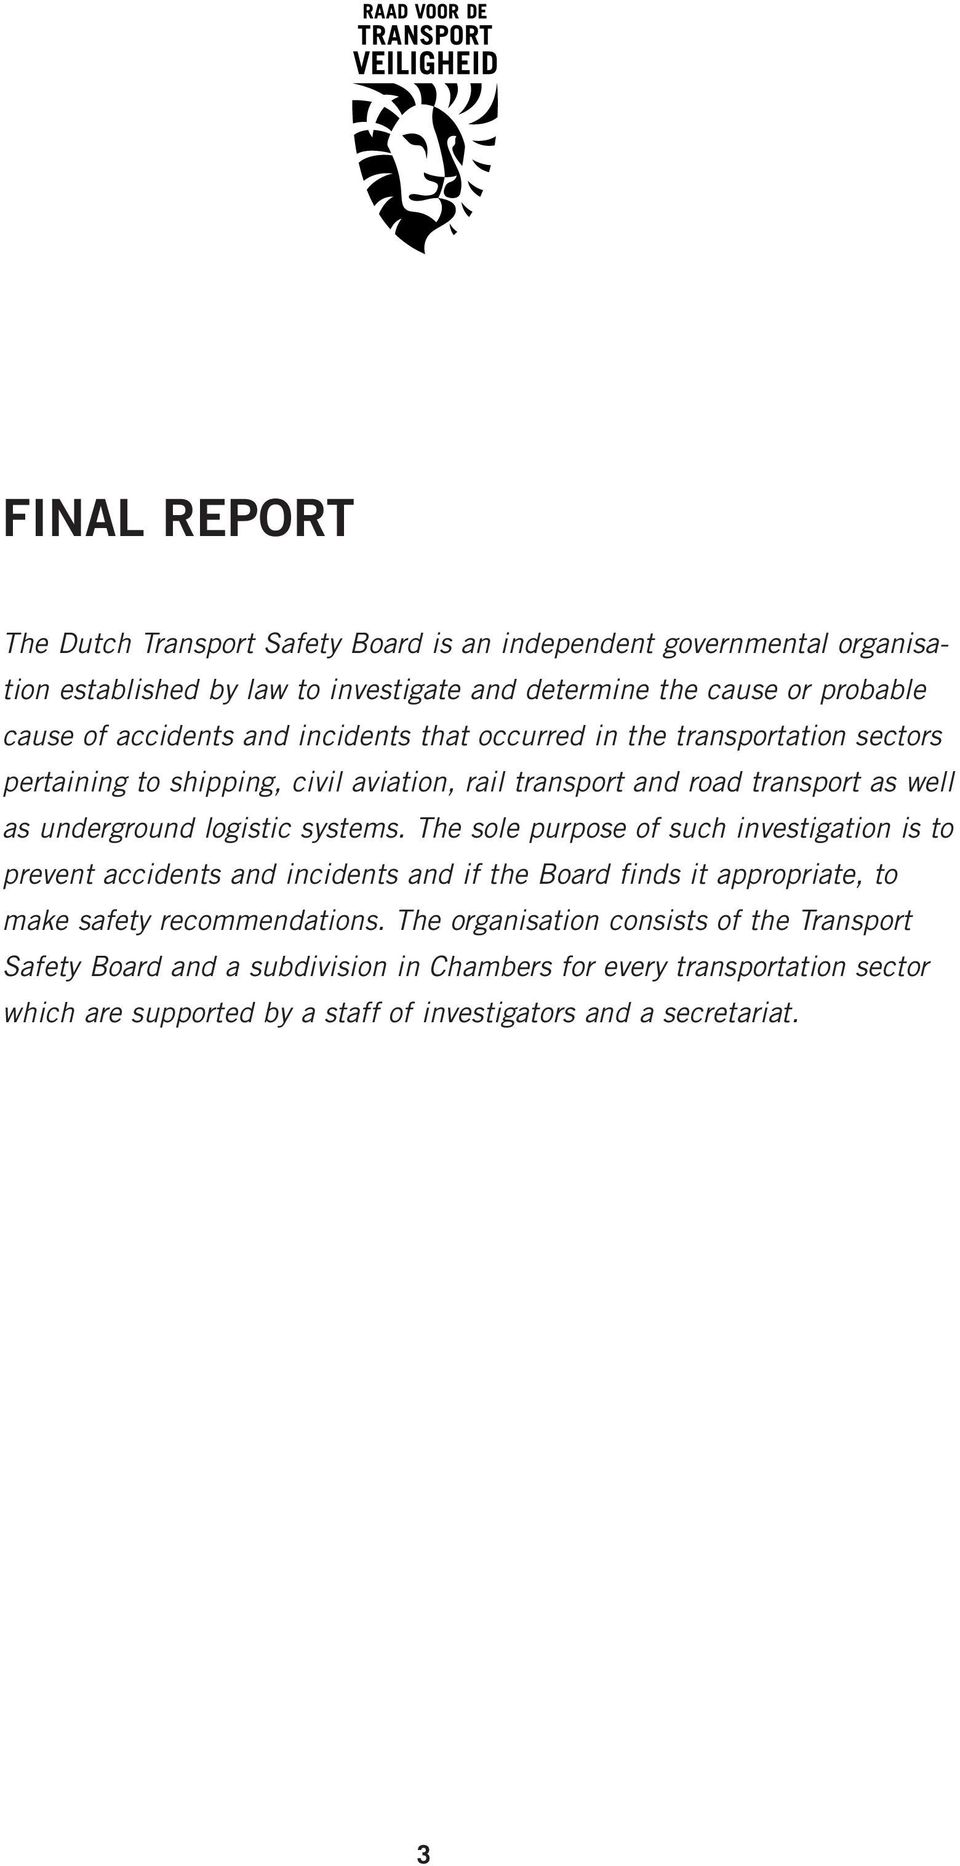 logistic systems. The sole purpose of such investigation is to prevent accidents and incidents and if the Board finds it appropriate, to make safety recommendations.